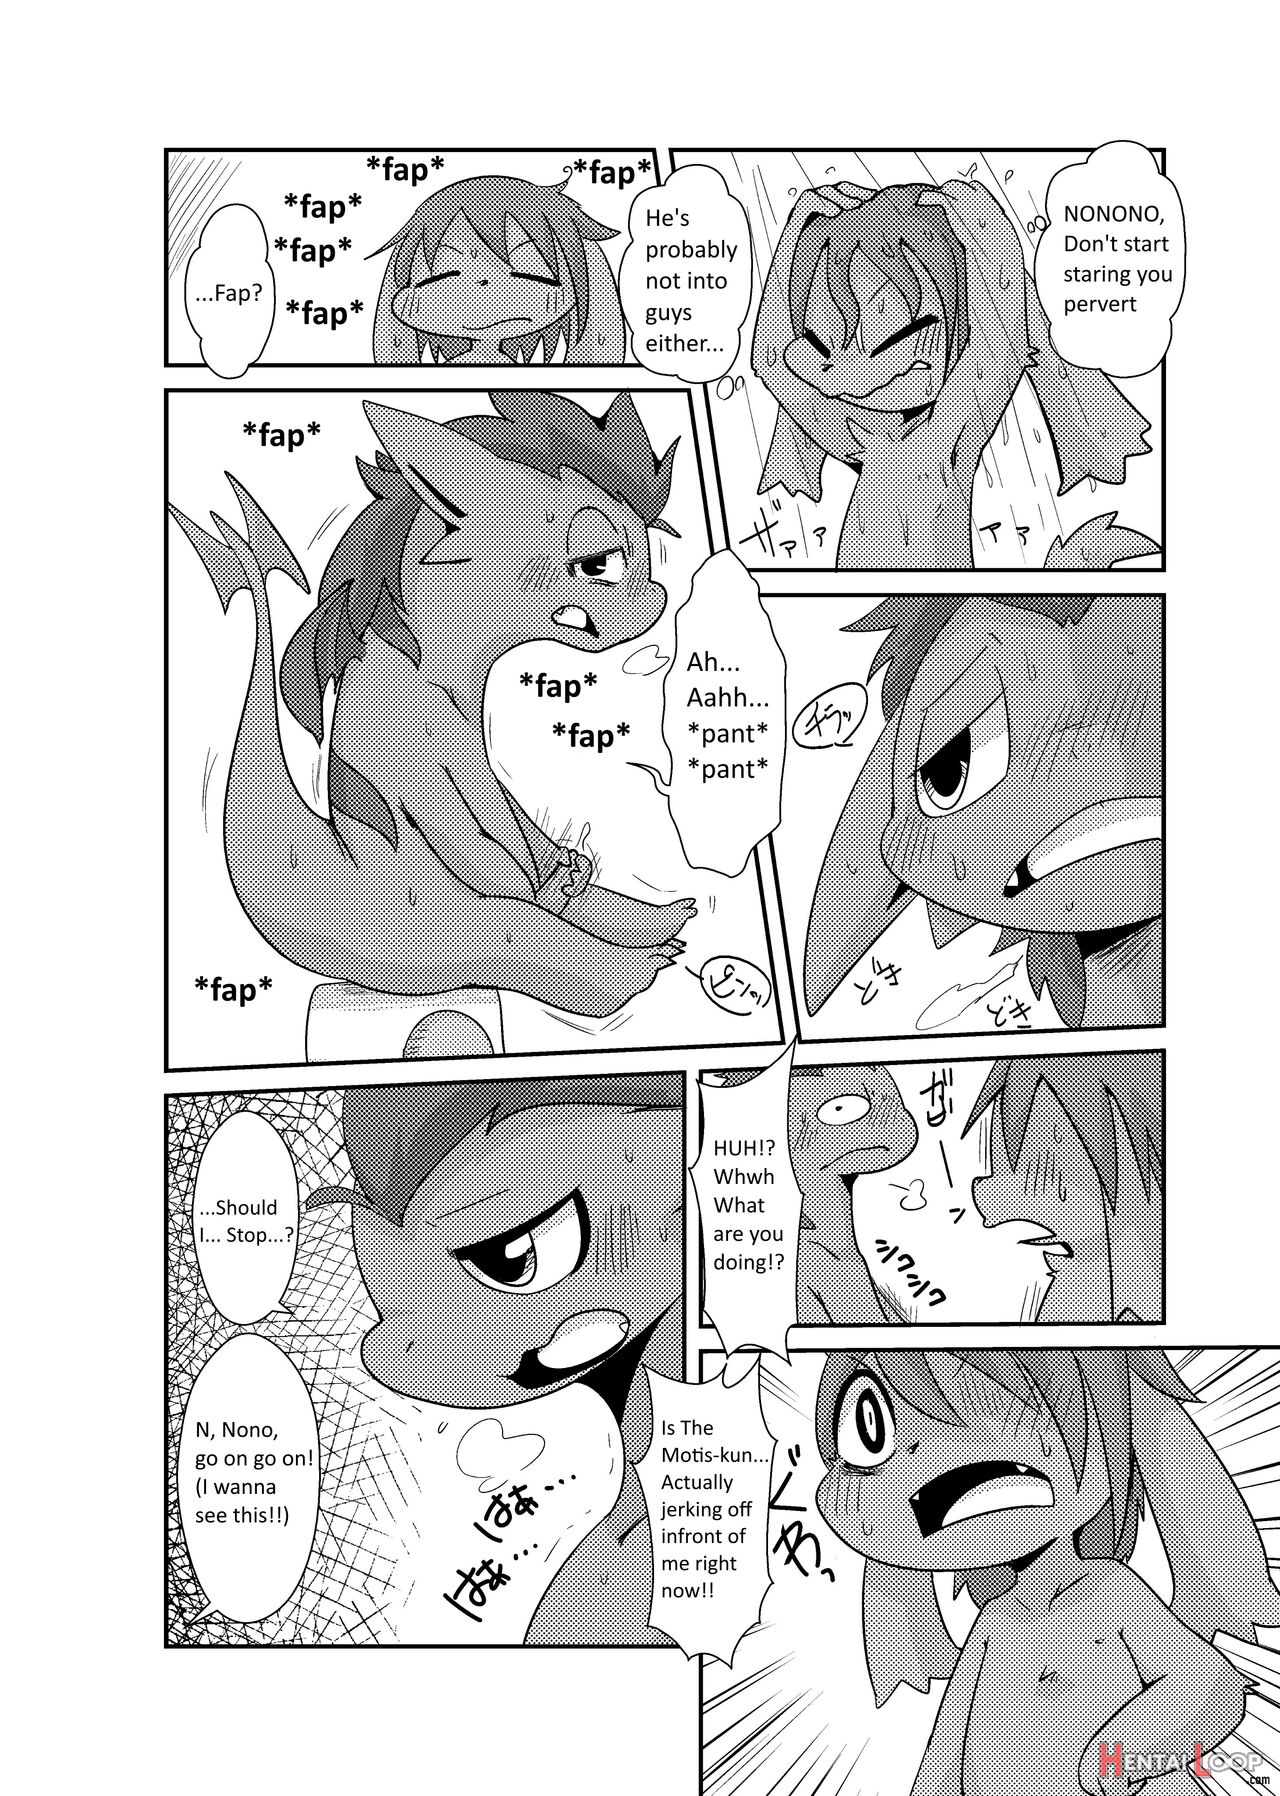 Doneru - Morning Bath, Just The Two Of Us page 4